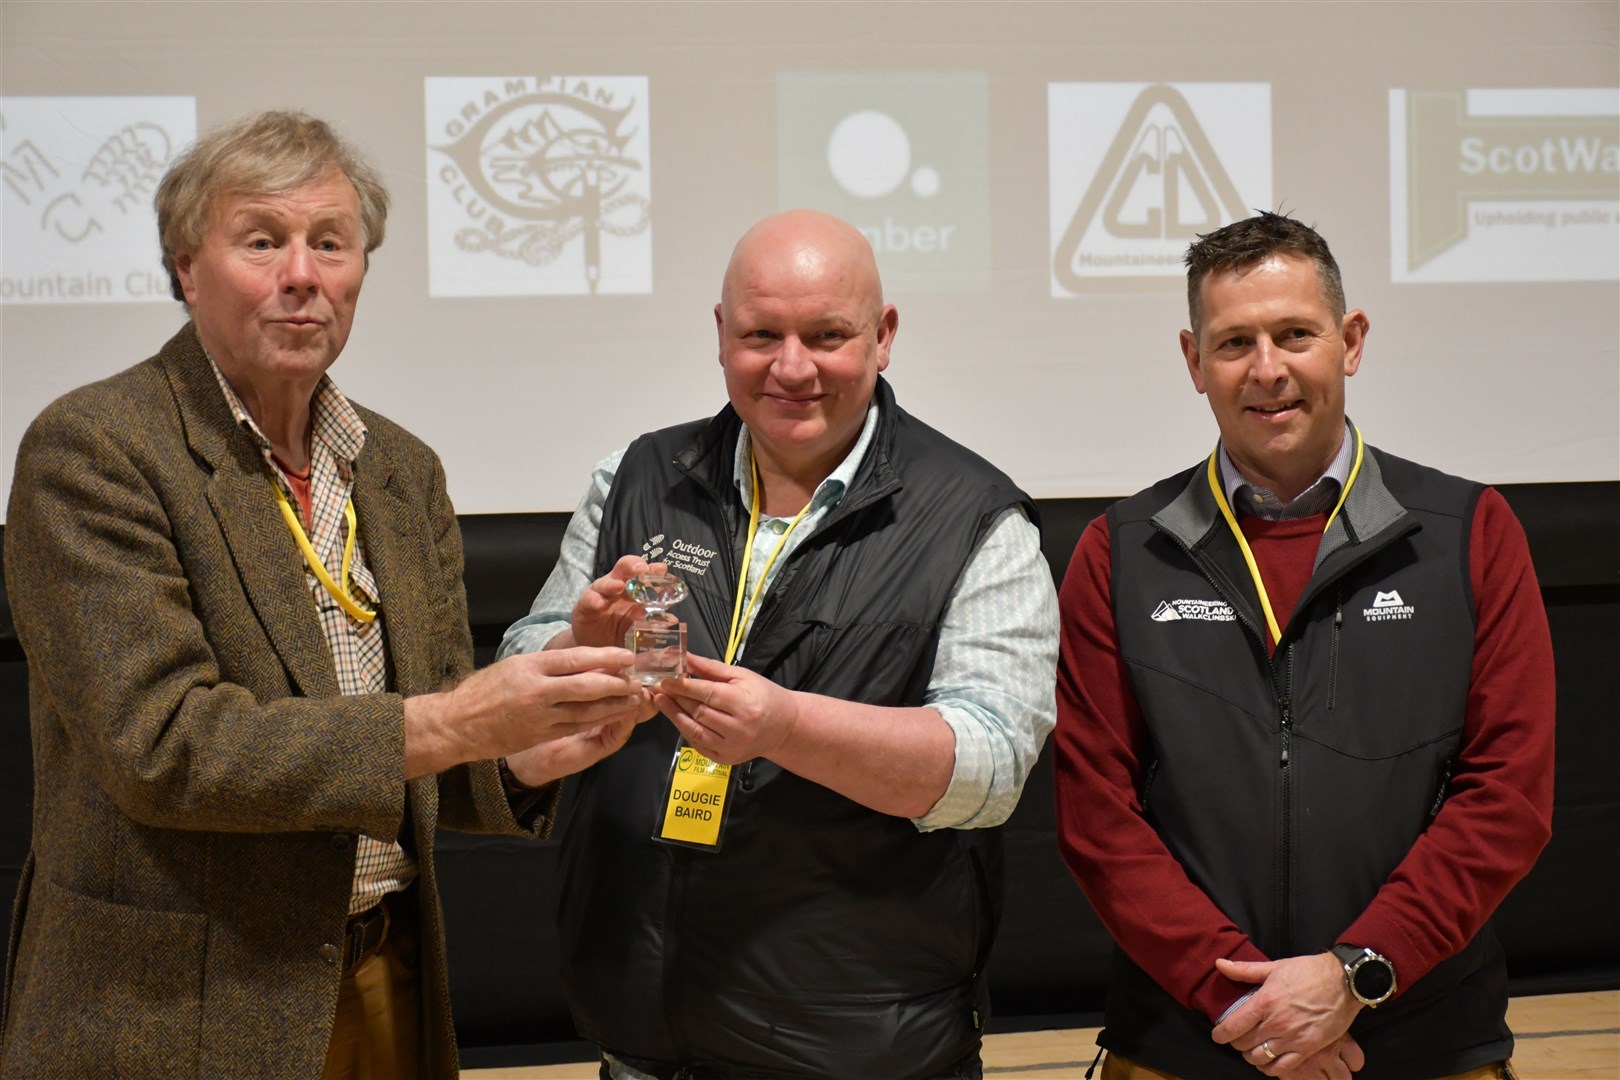 Scottish Mountain Trust chairman John Fowler (left) presents OATS chief exec Dougie Baird and Scottish Mountaineering CEO Stuart Younie (right) with the £100,000 Diamond Grant at the Dundee Mountain Film Festival.